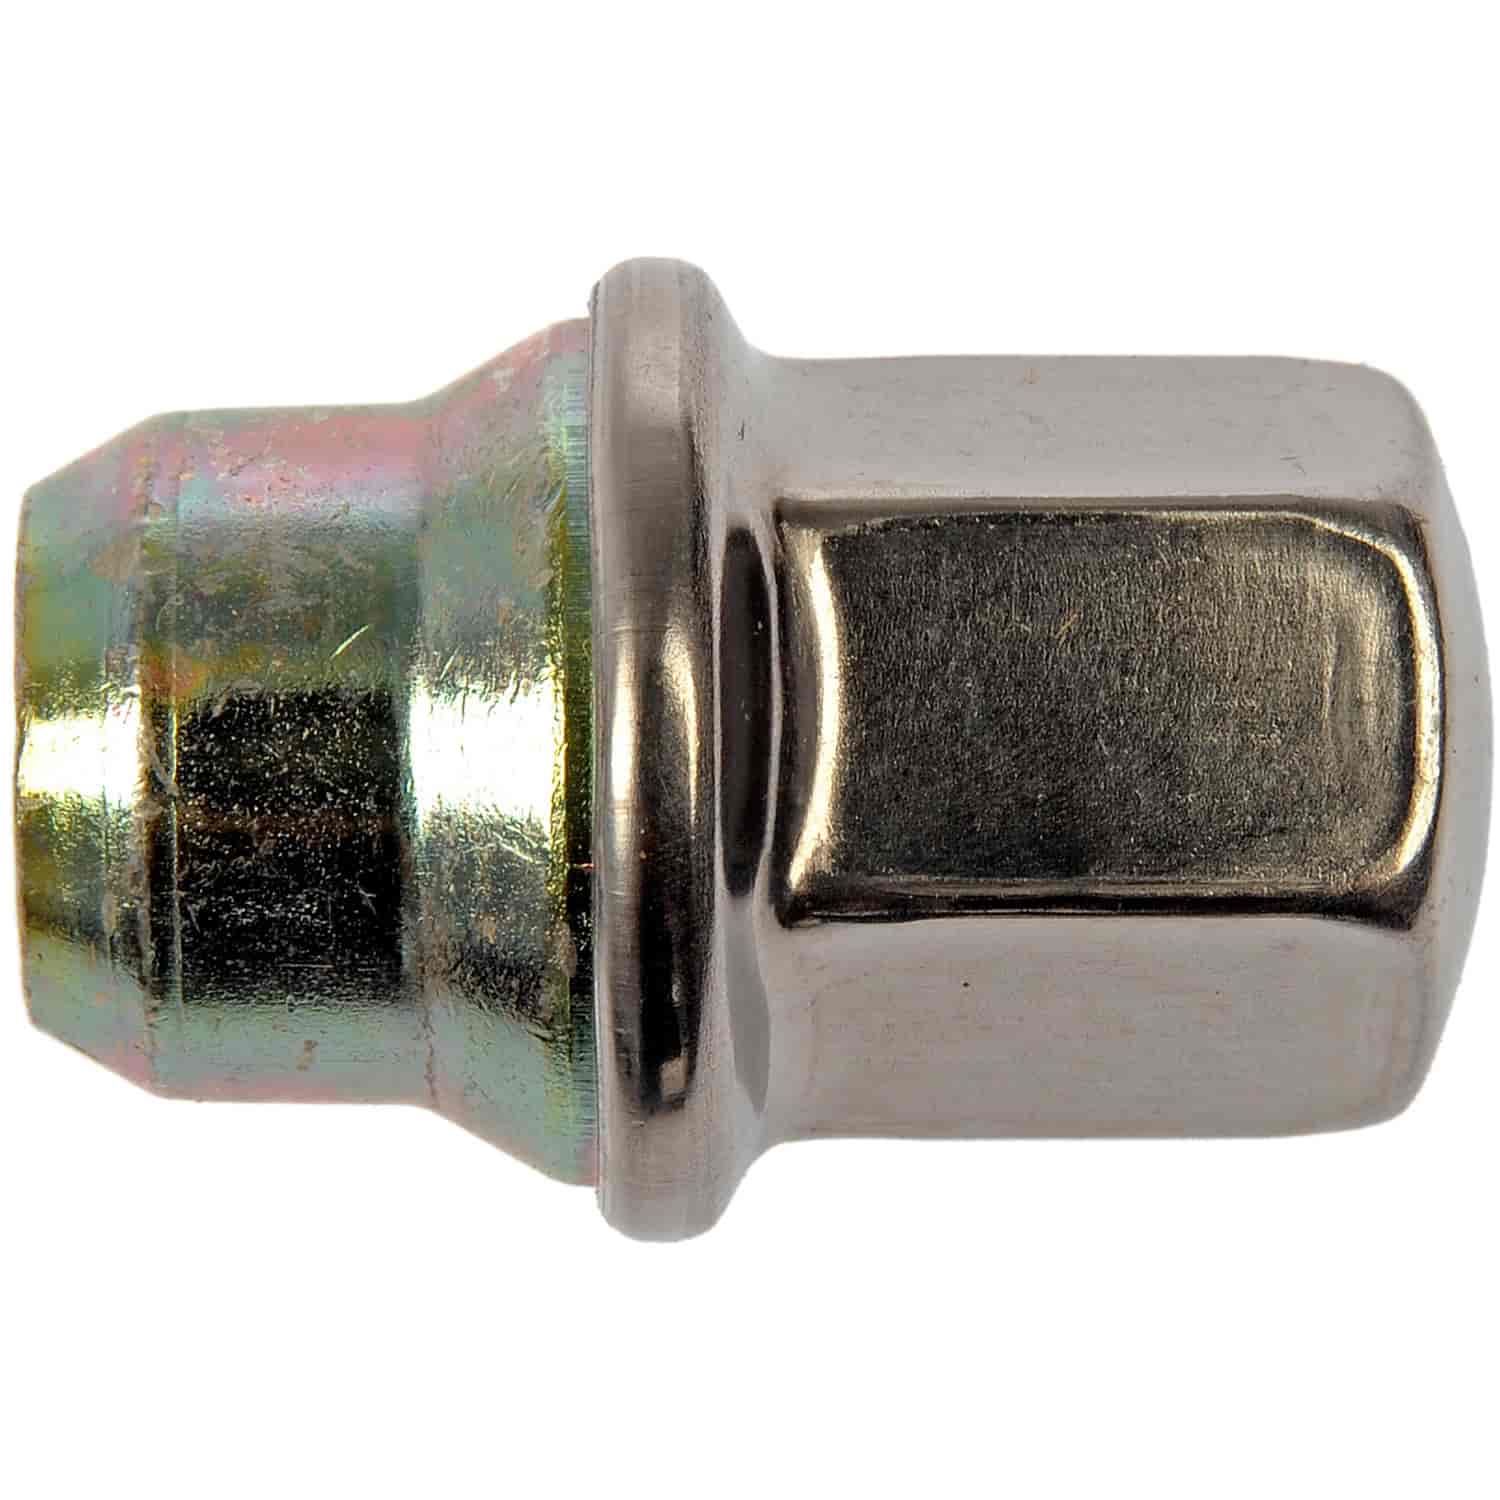 Wheel Nut 9/16-18 Dometop Capped - 7/8 In. Hex 1-13/16 In. Length